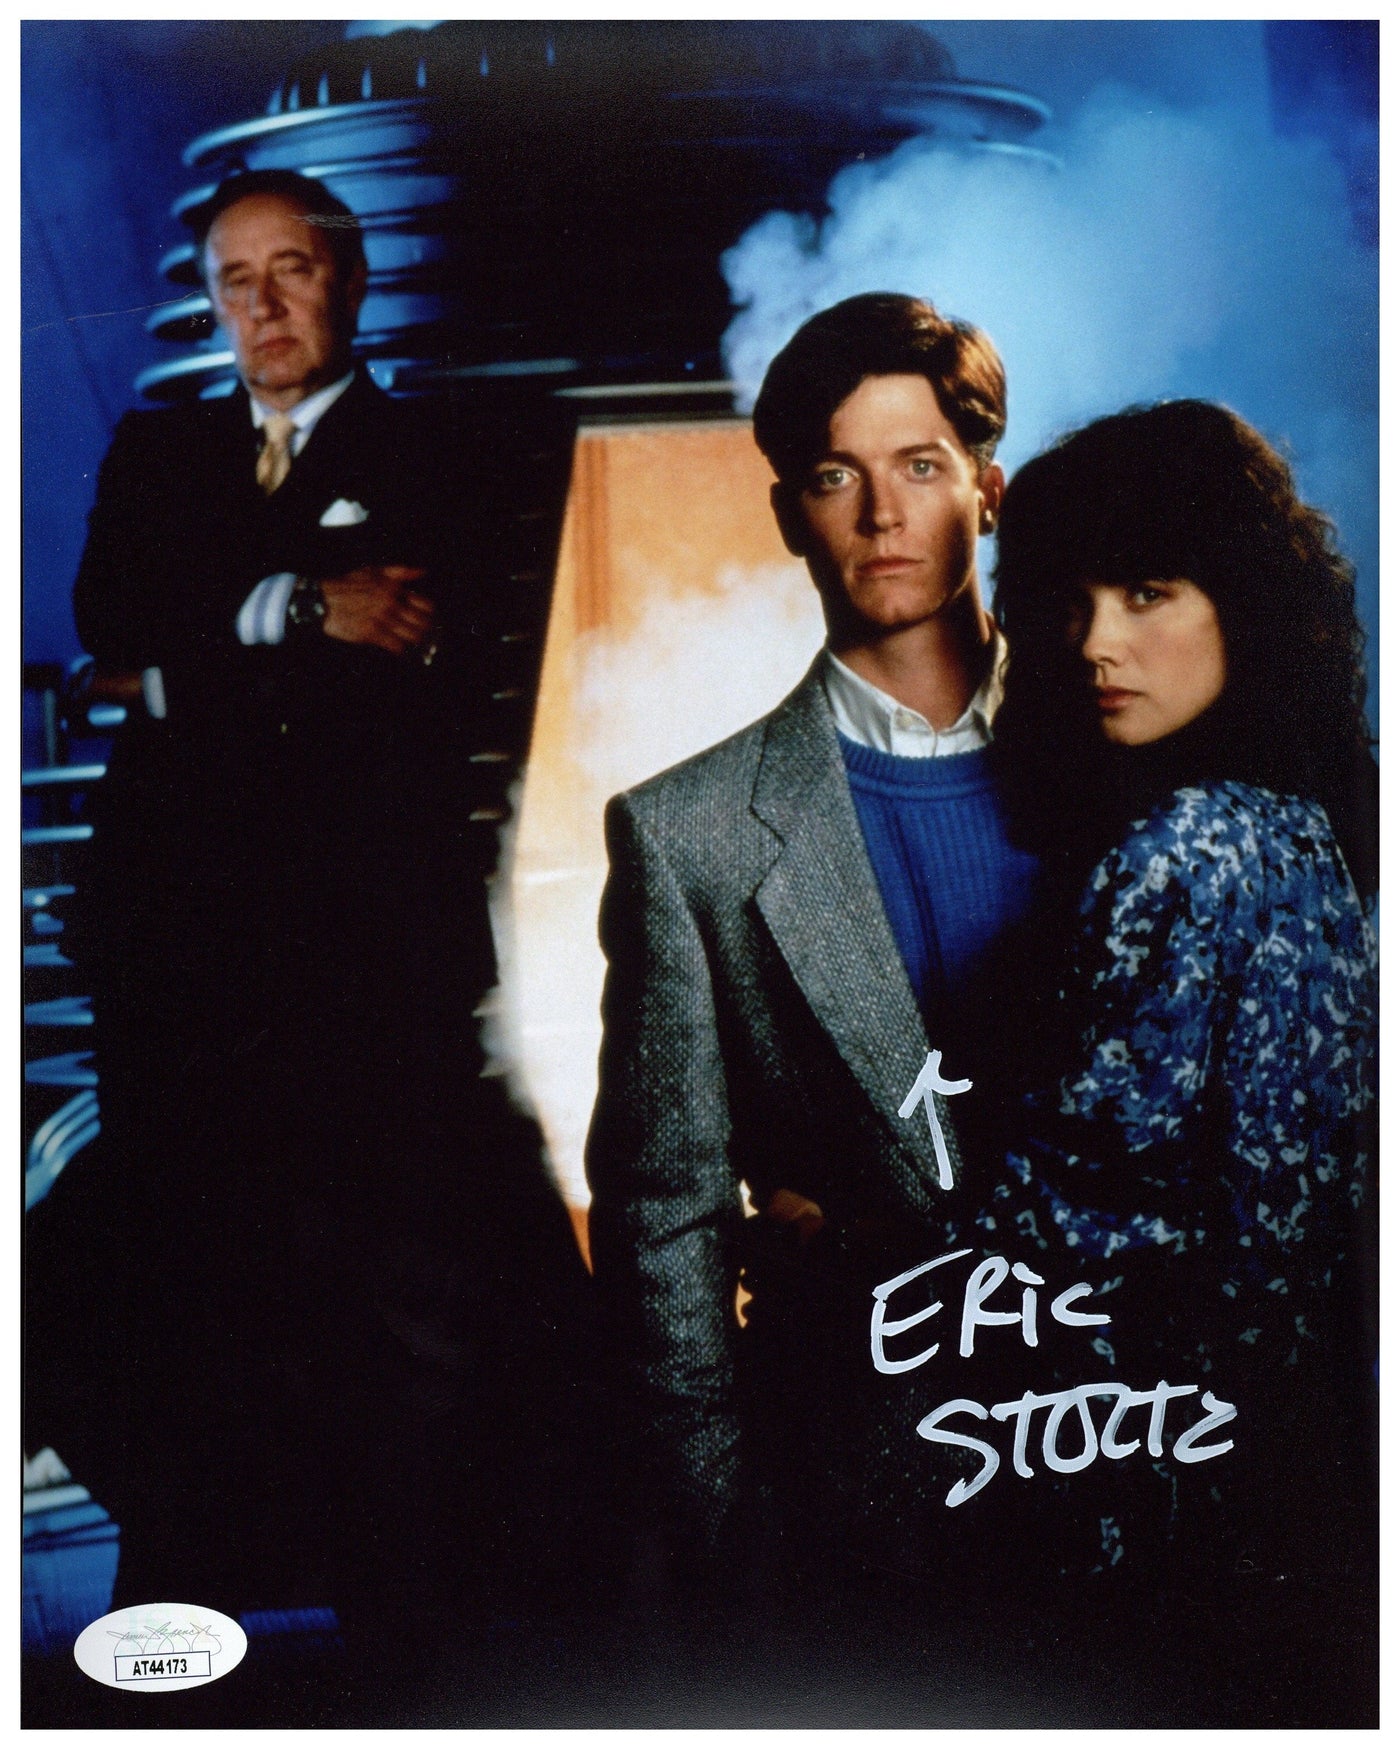 Eric Stoltz Signed 8x10 Photo Some The Fly 2 Horror Autographed JSA COA